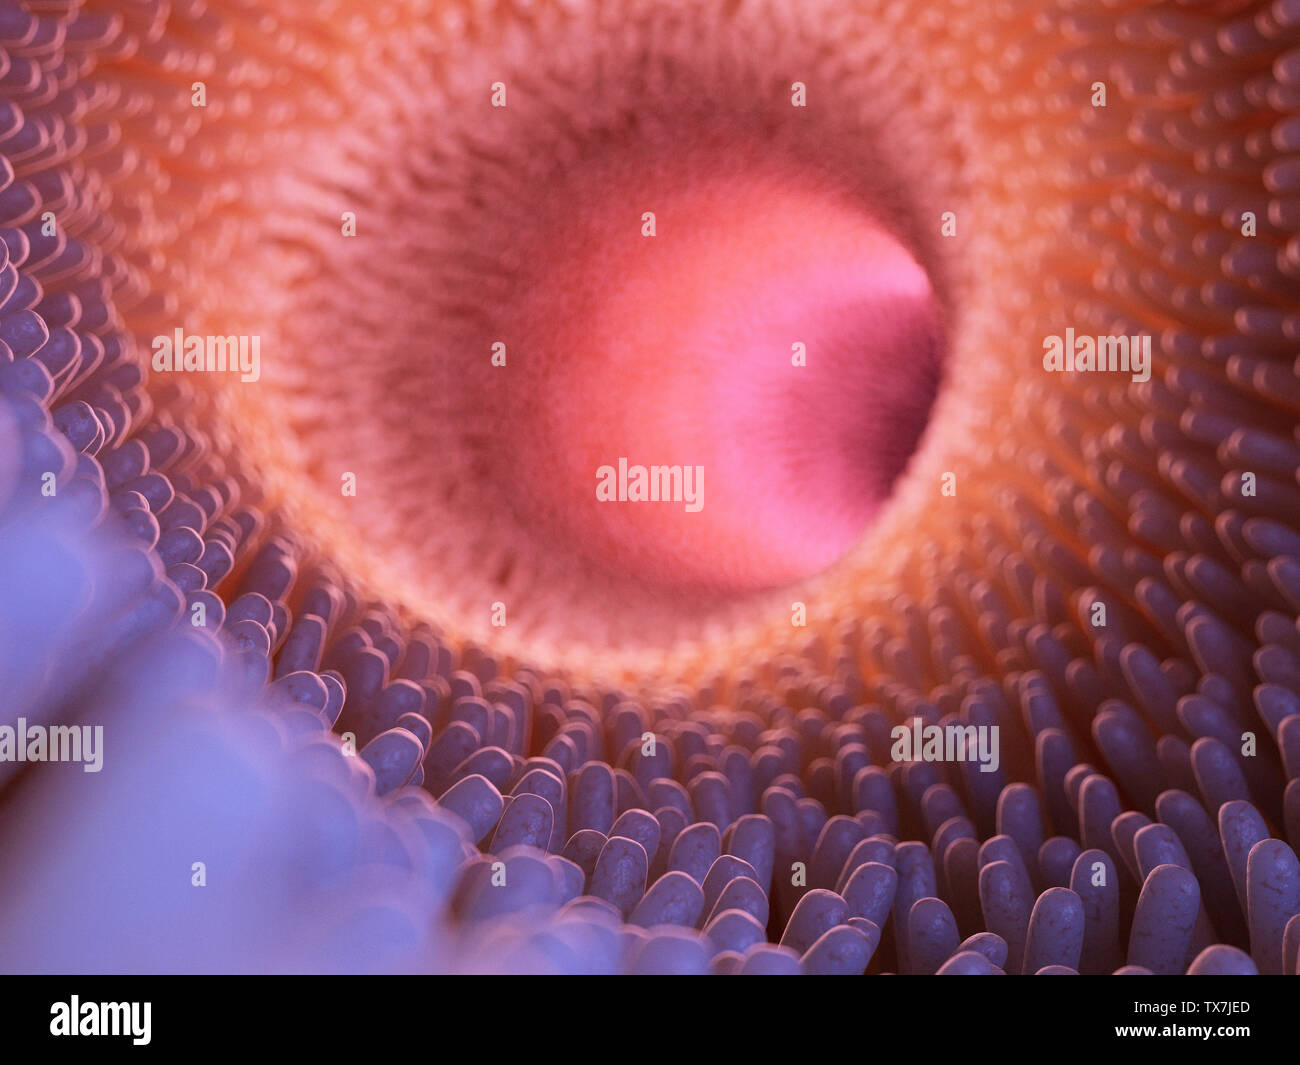 3d rendered medically accurate illustration of intestinal villi Stock Photo